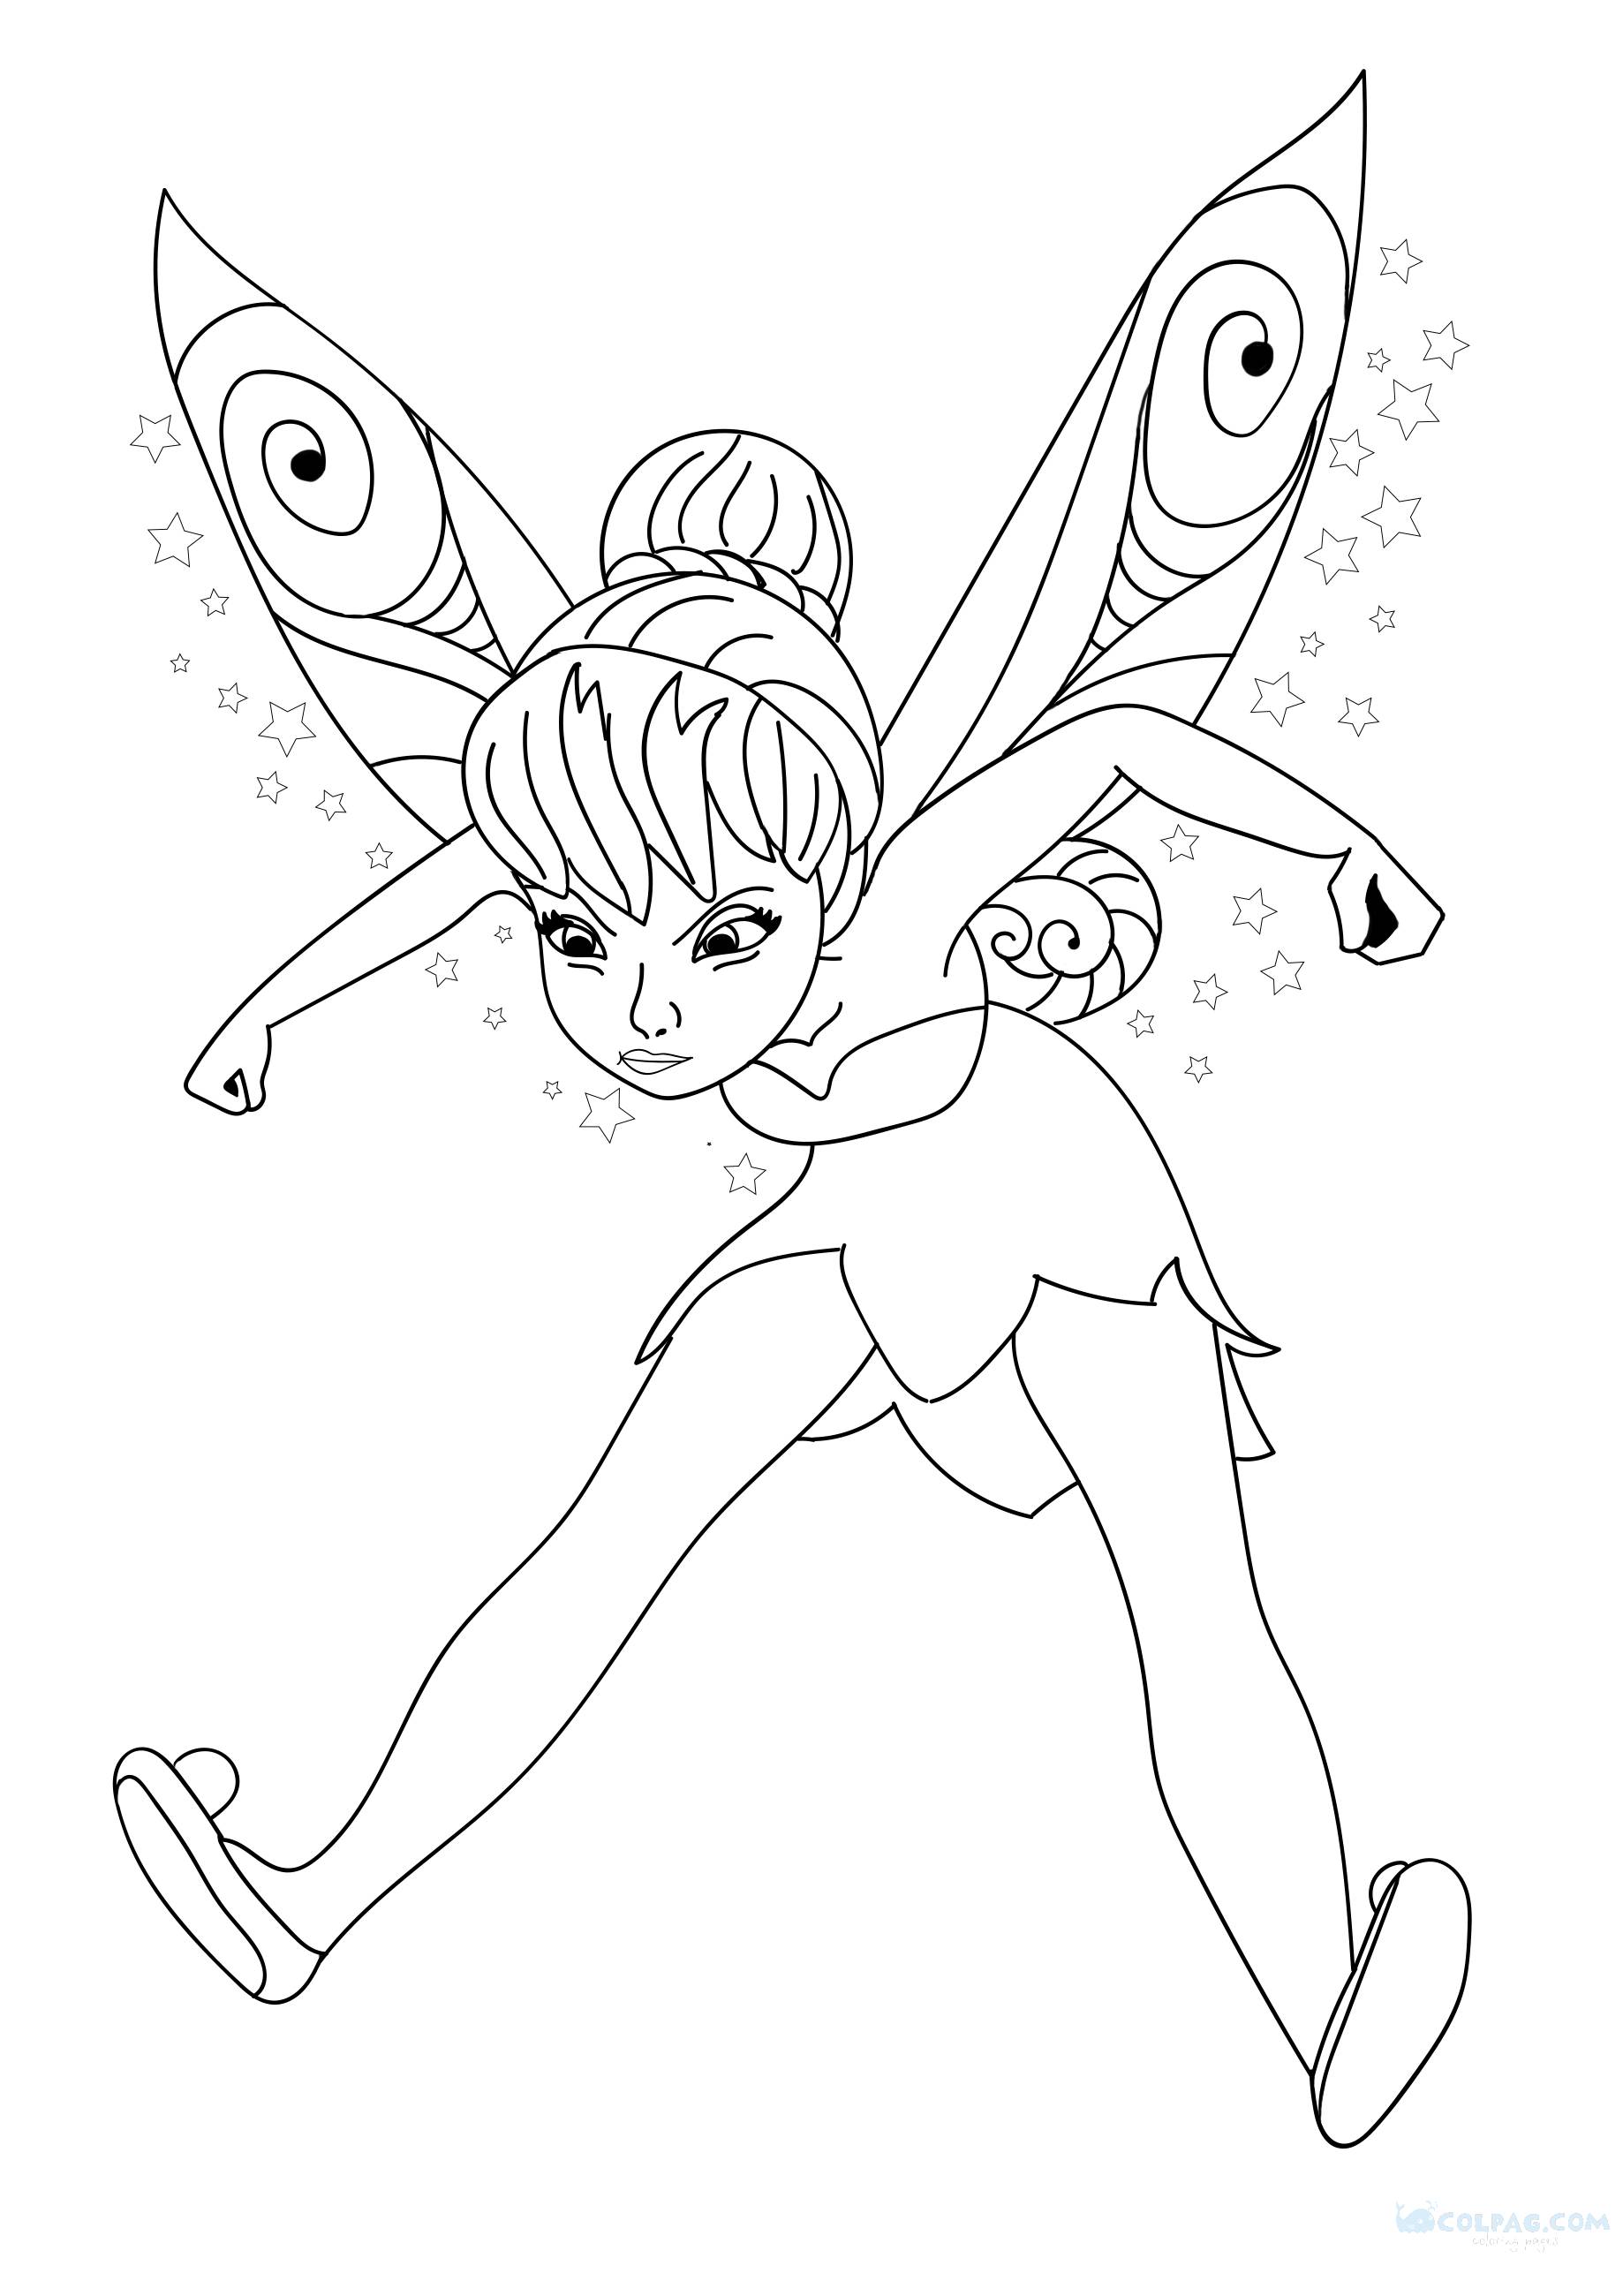 tinkerbell-coloring-page-colpag-com-4